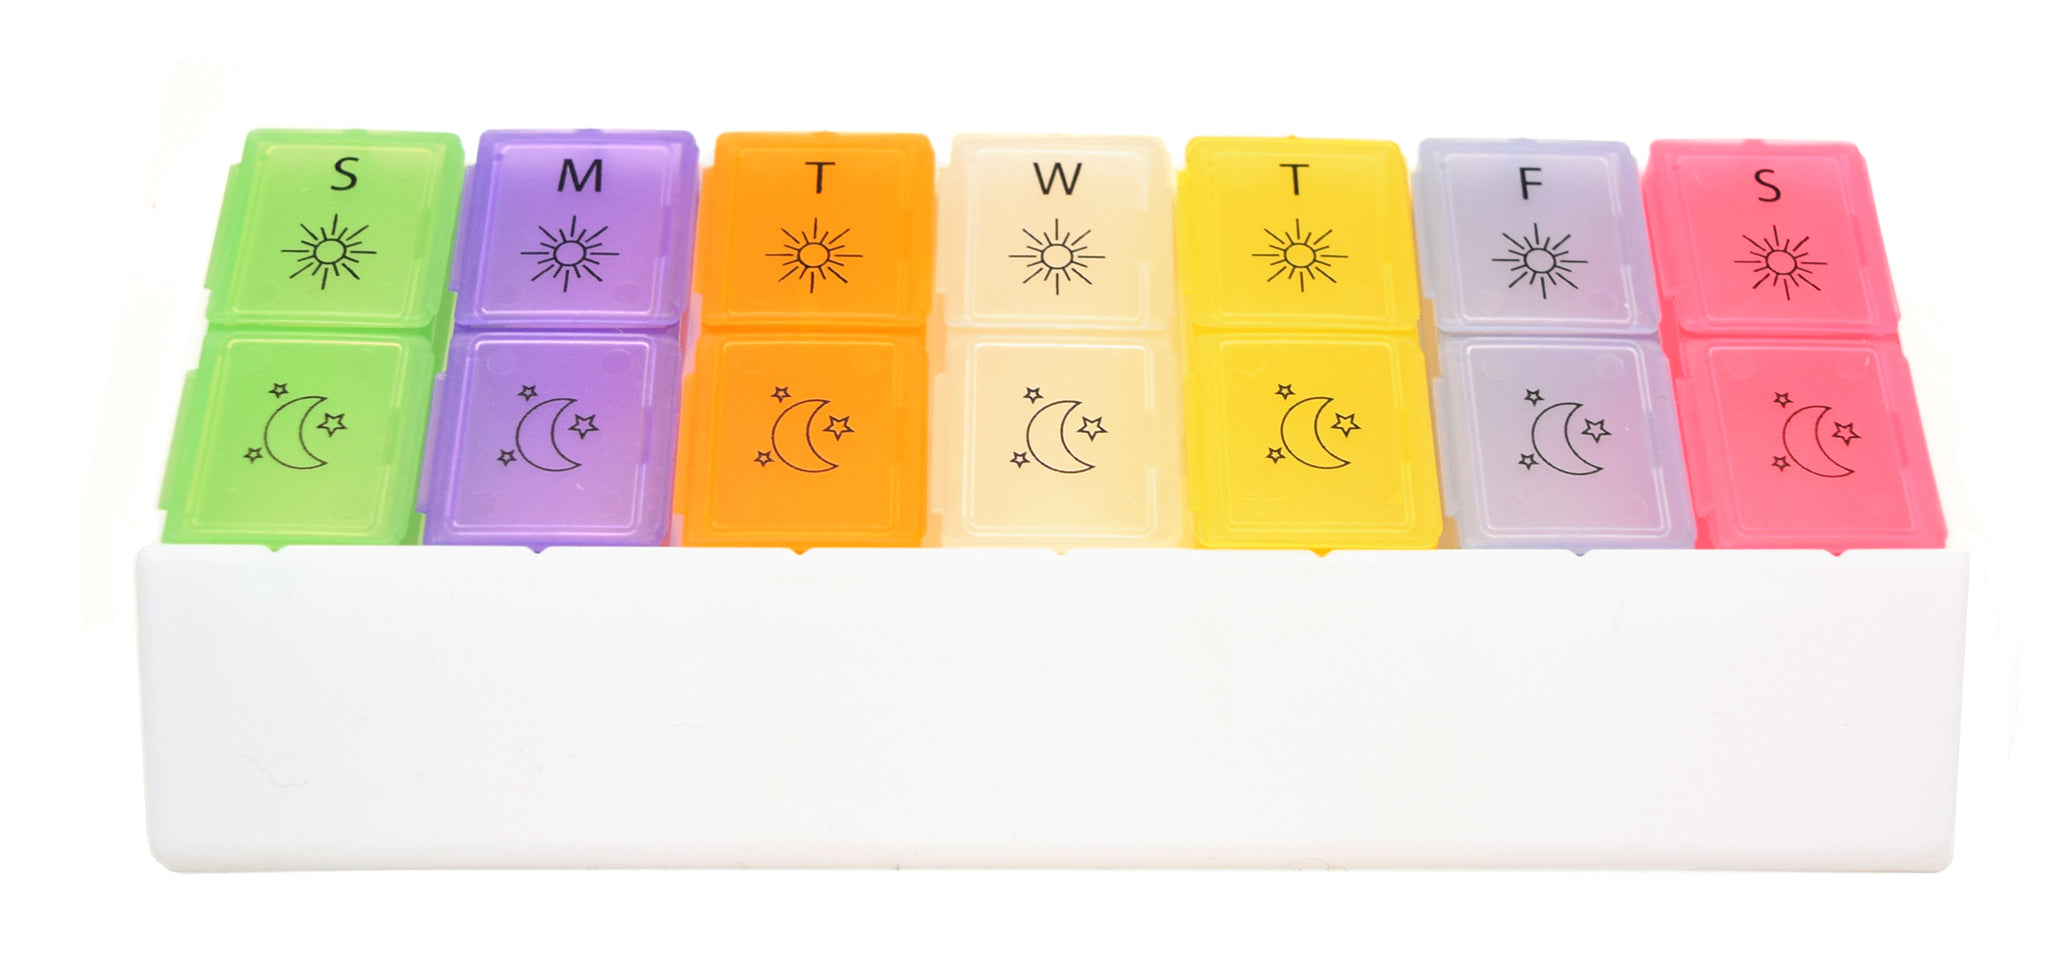 MedWrite 3 Times a Day Weekly Pill Organizer - Jumbo – Pill Thing